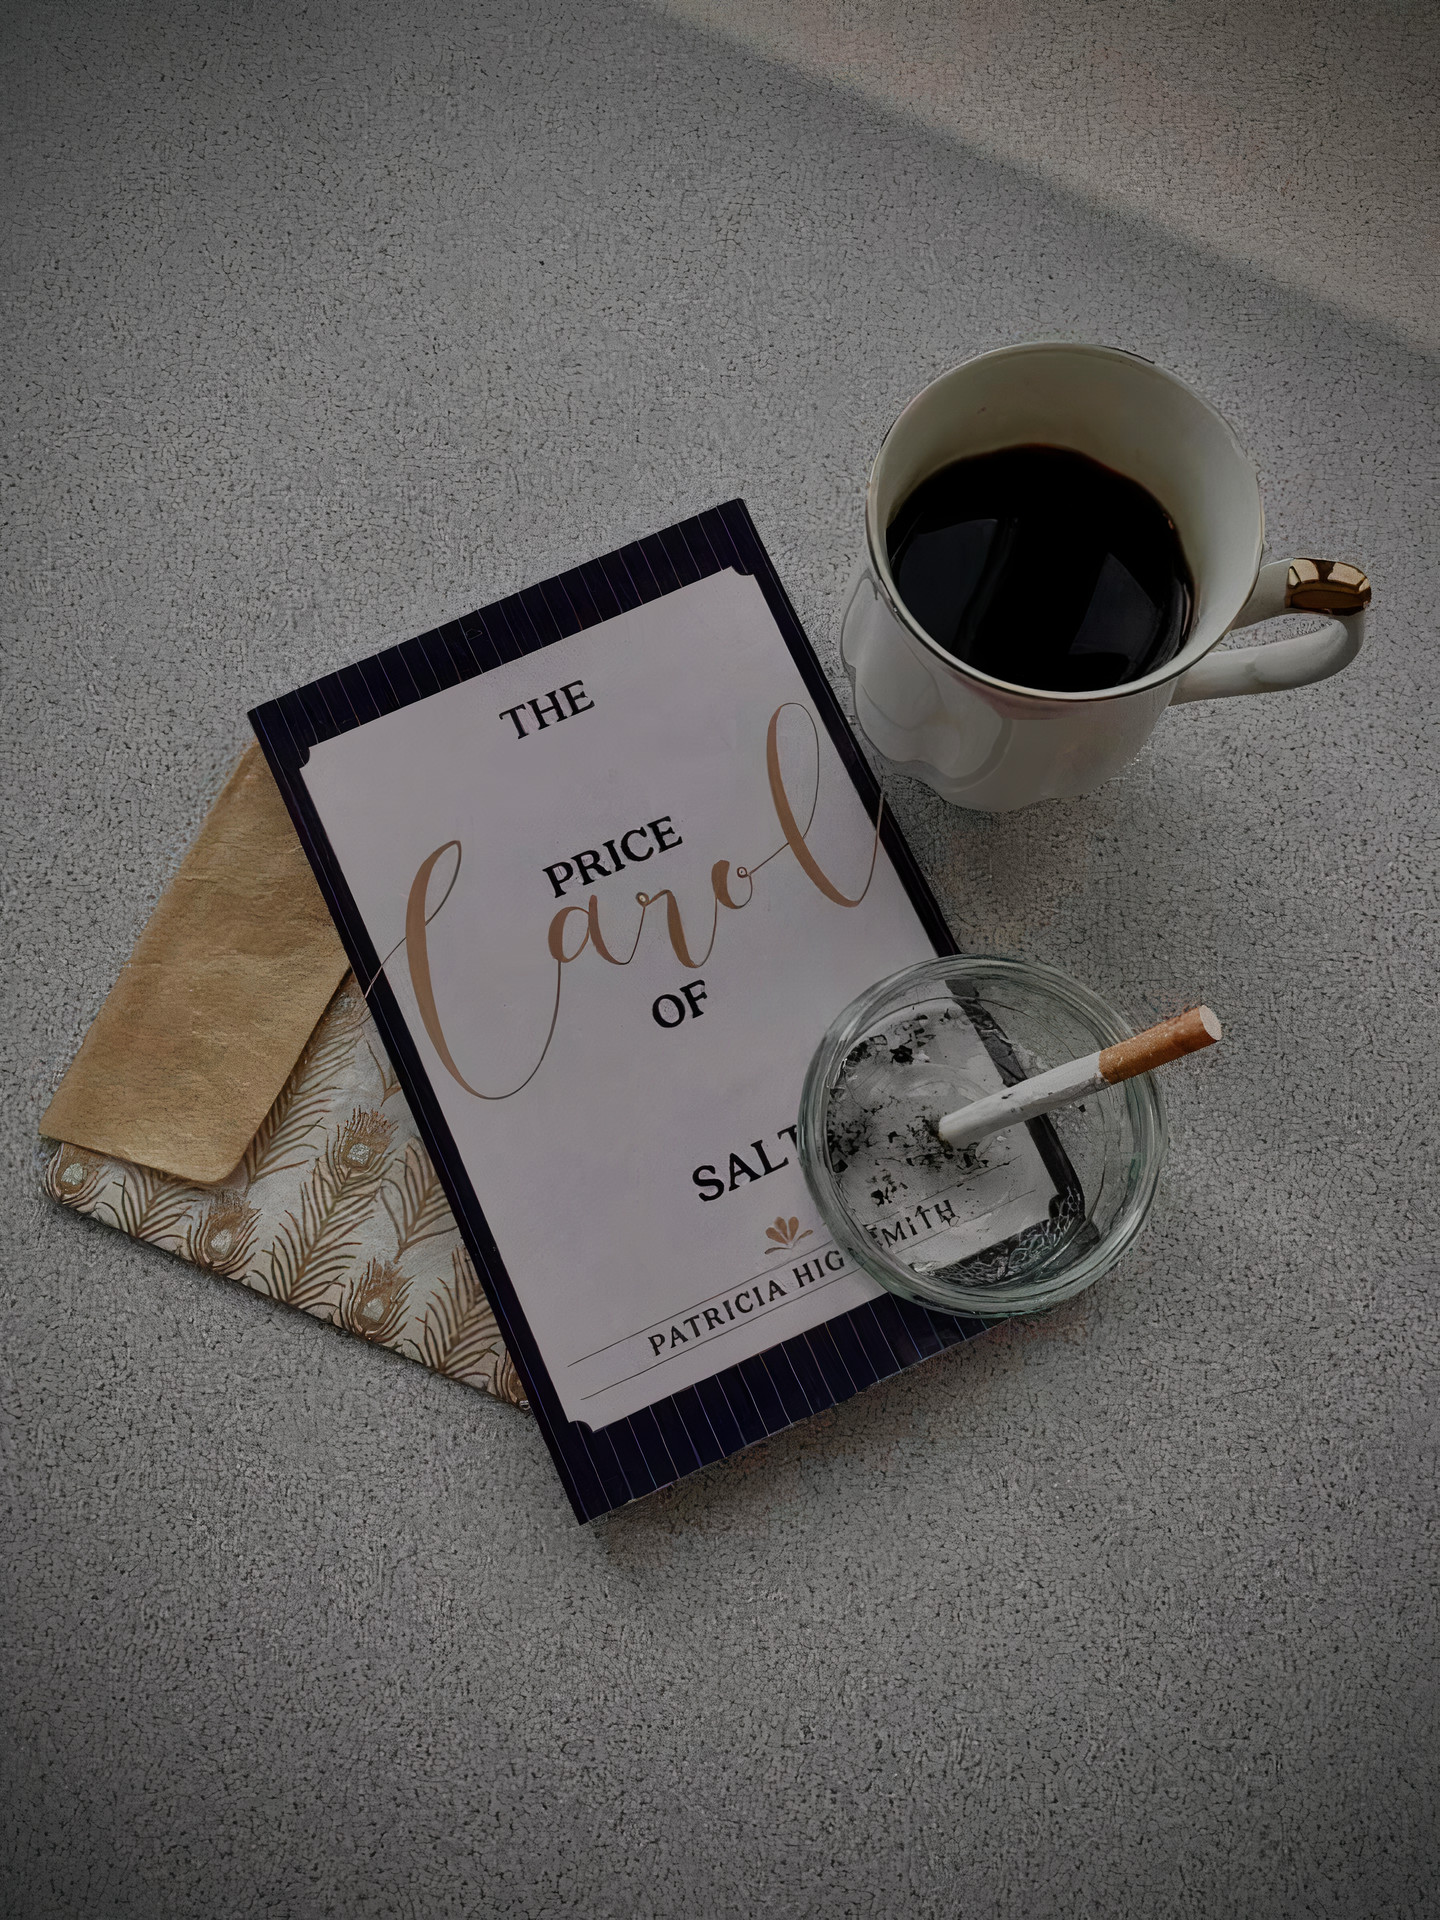 A look brief look at the first edition of Patricia Highsmith's lesbian classic The Price Of Salt.